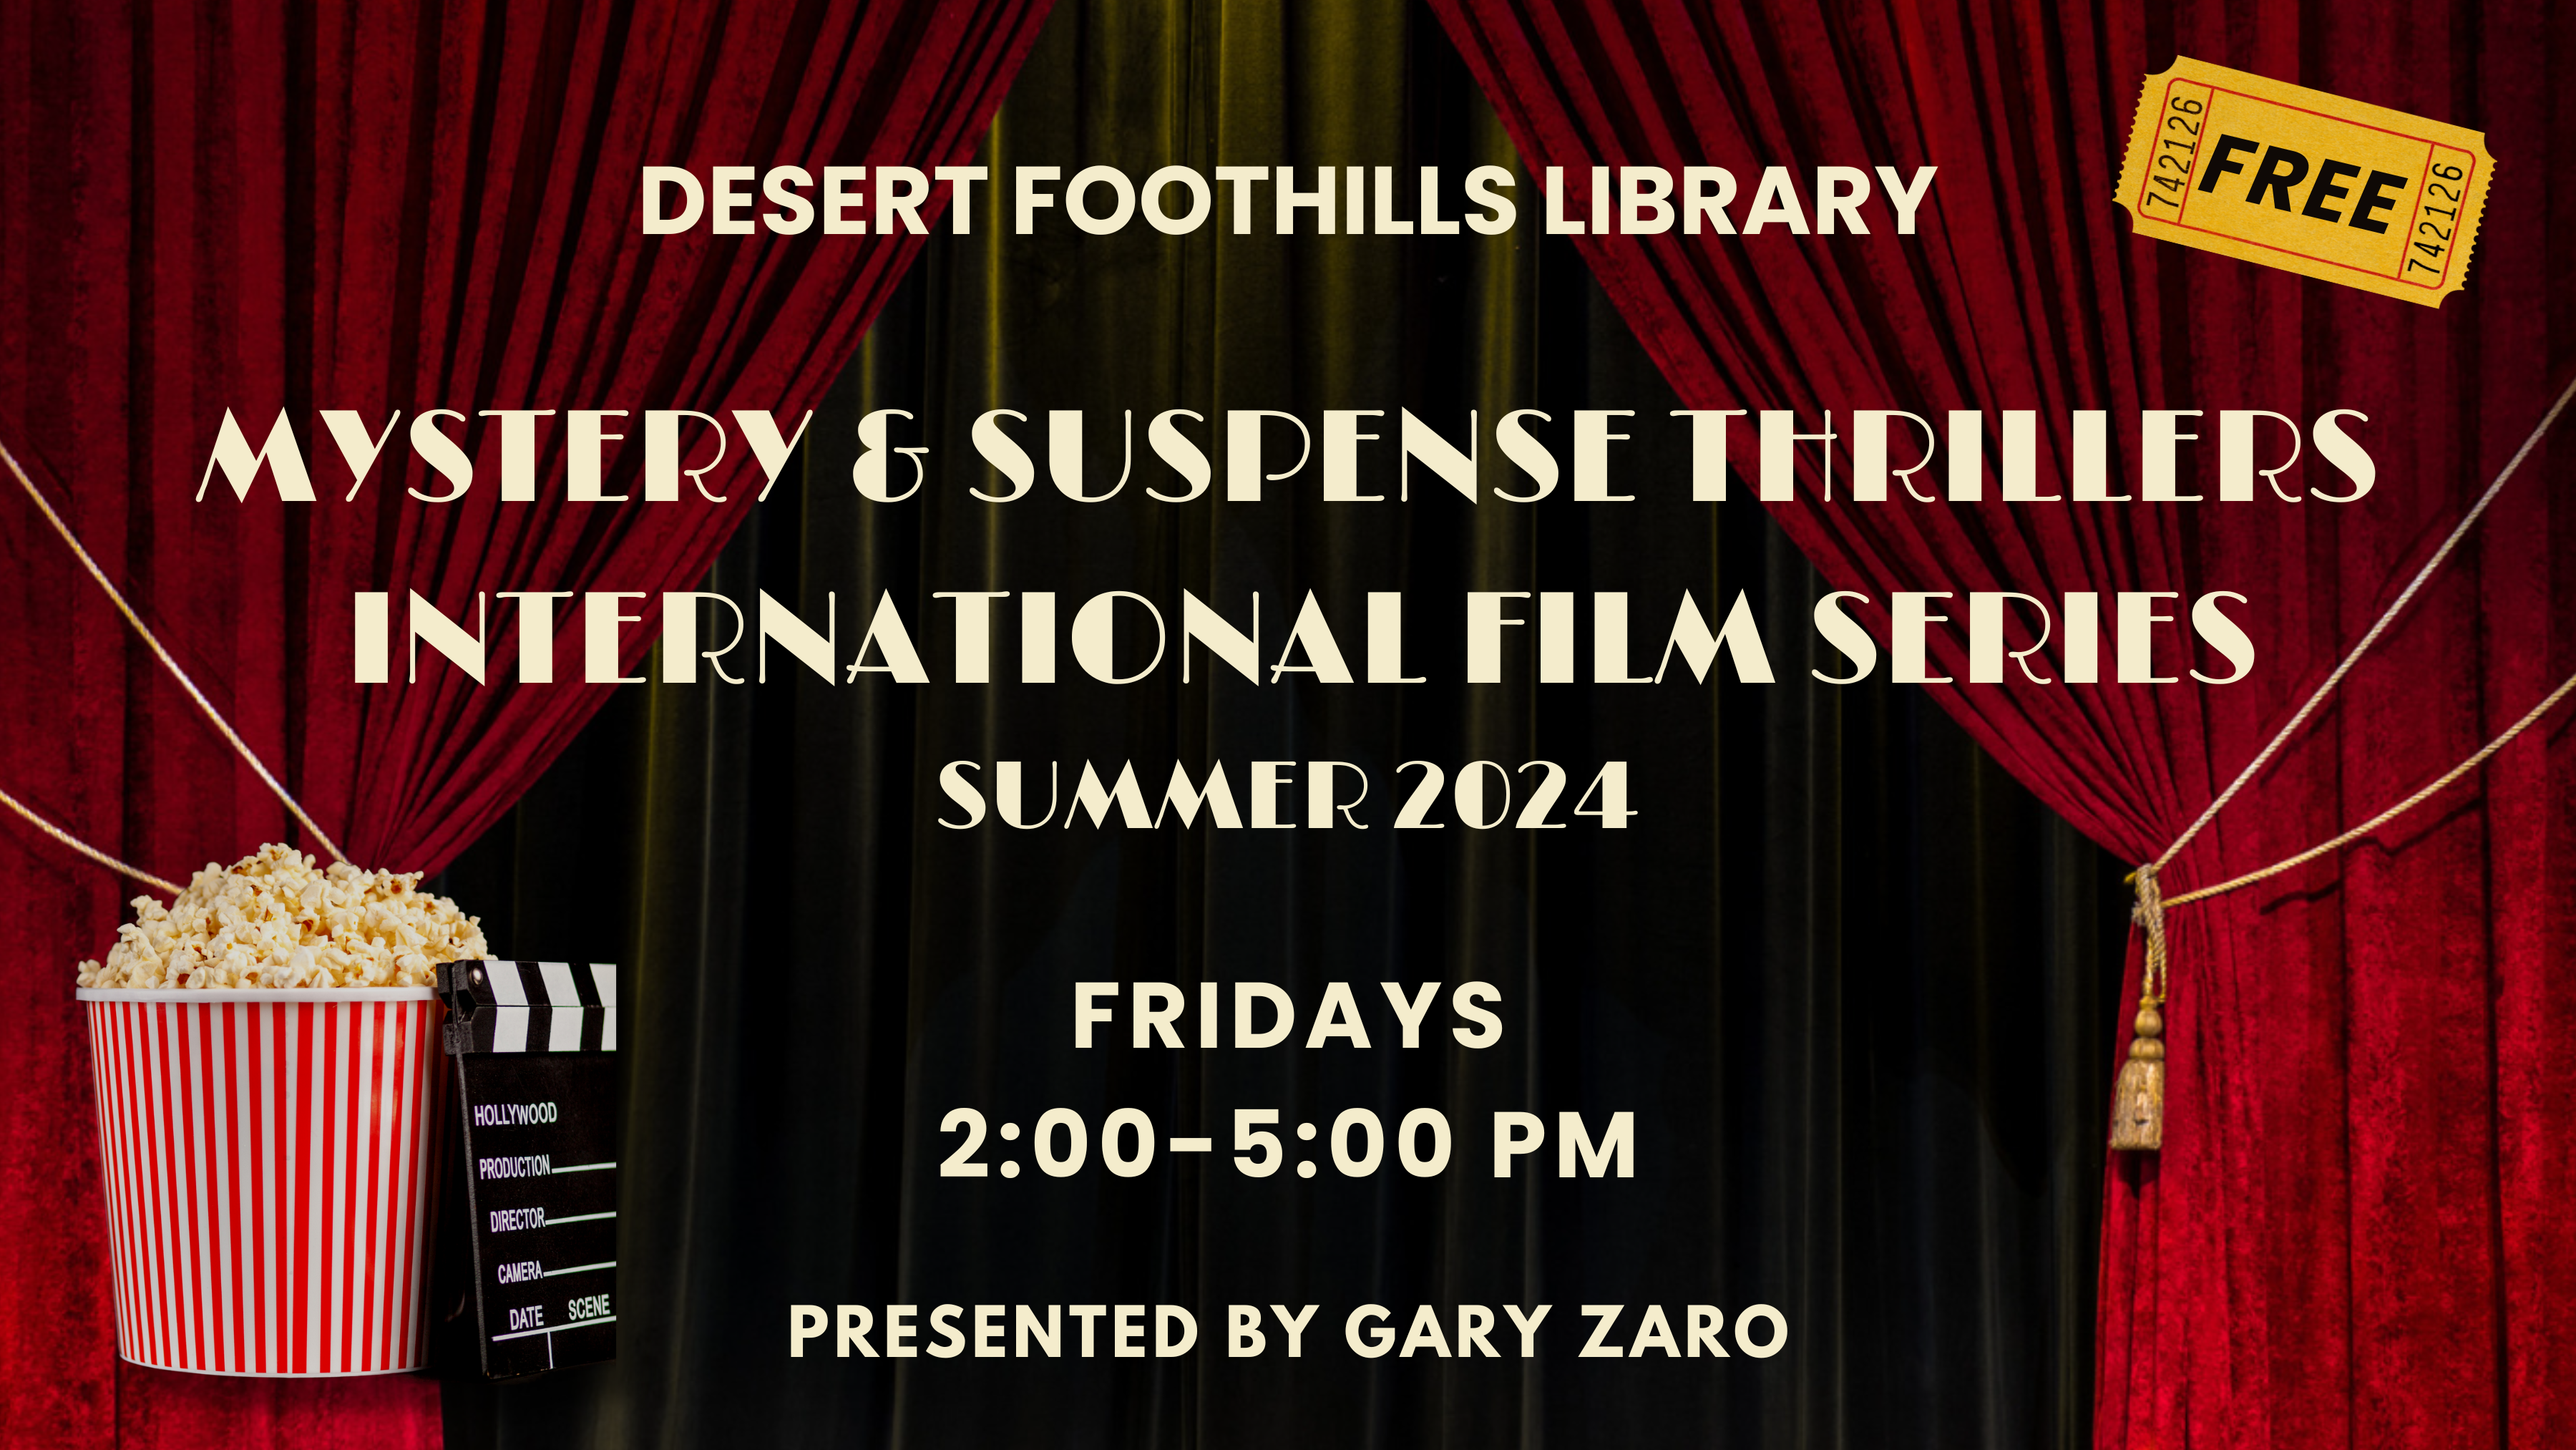 free movies at the desert foothills library